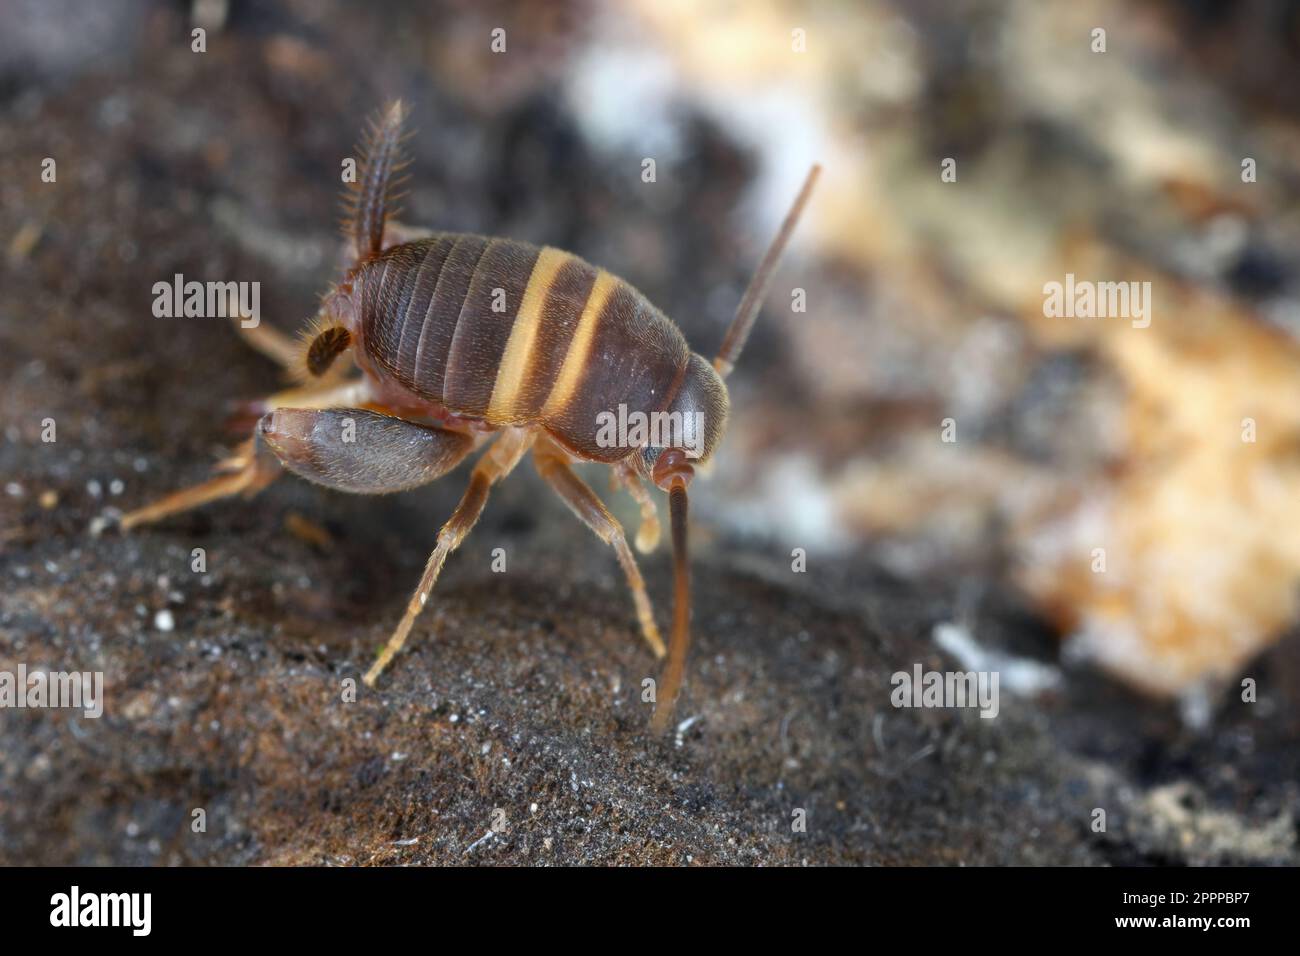 Ant cricket, Myrmecophilous cricket, Ant's nest cricket (Myrmecophilus acervorum). Orthopteran insects in the family Myrmecophilidae. Stock Photo